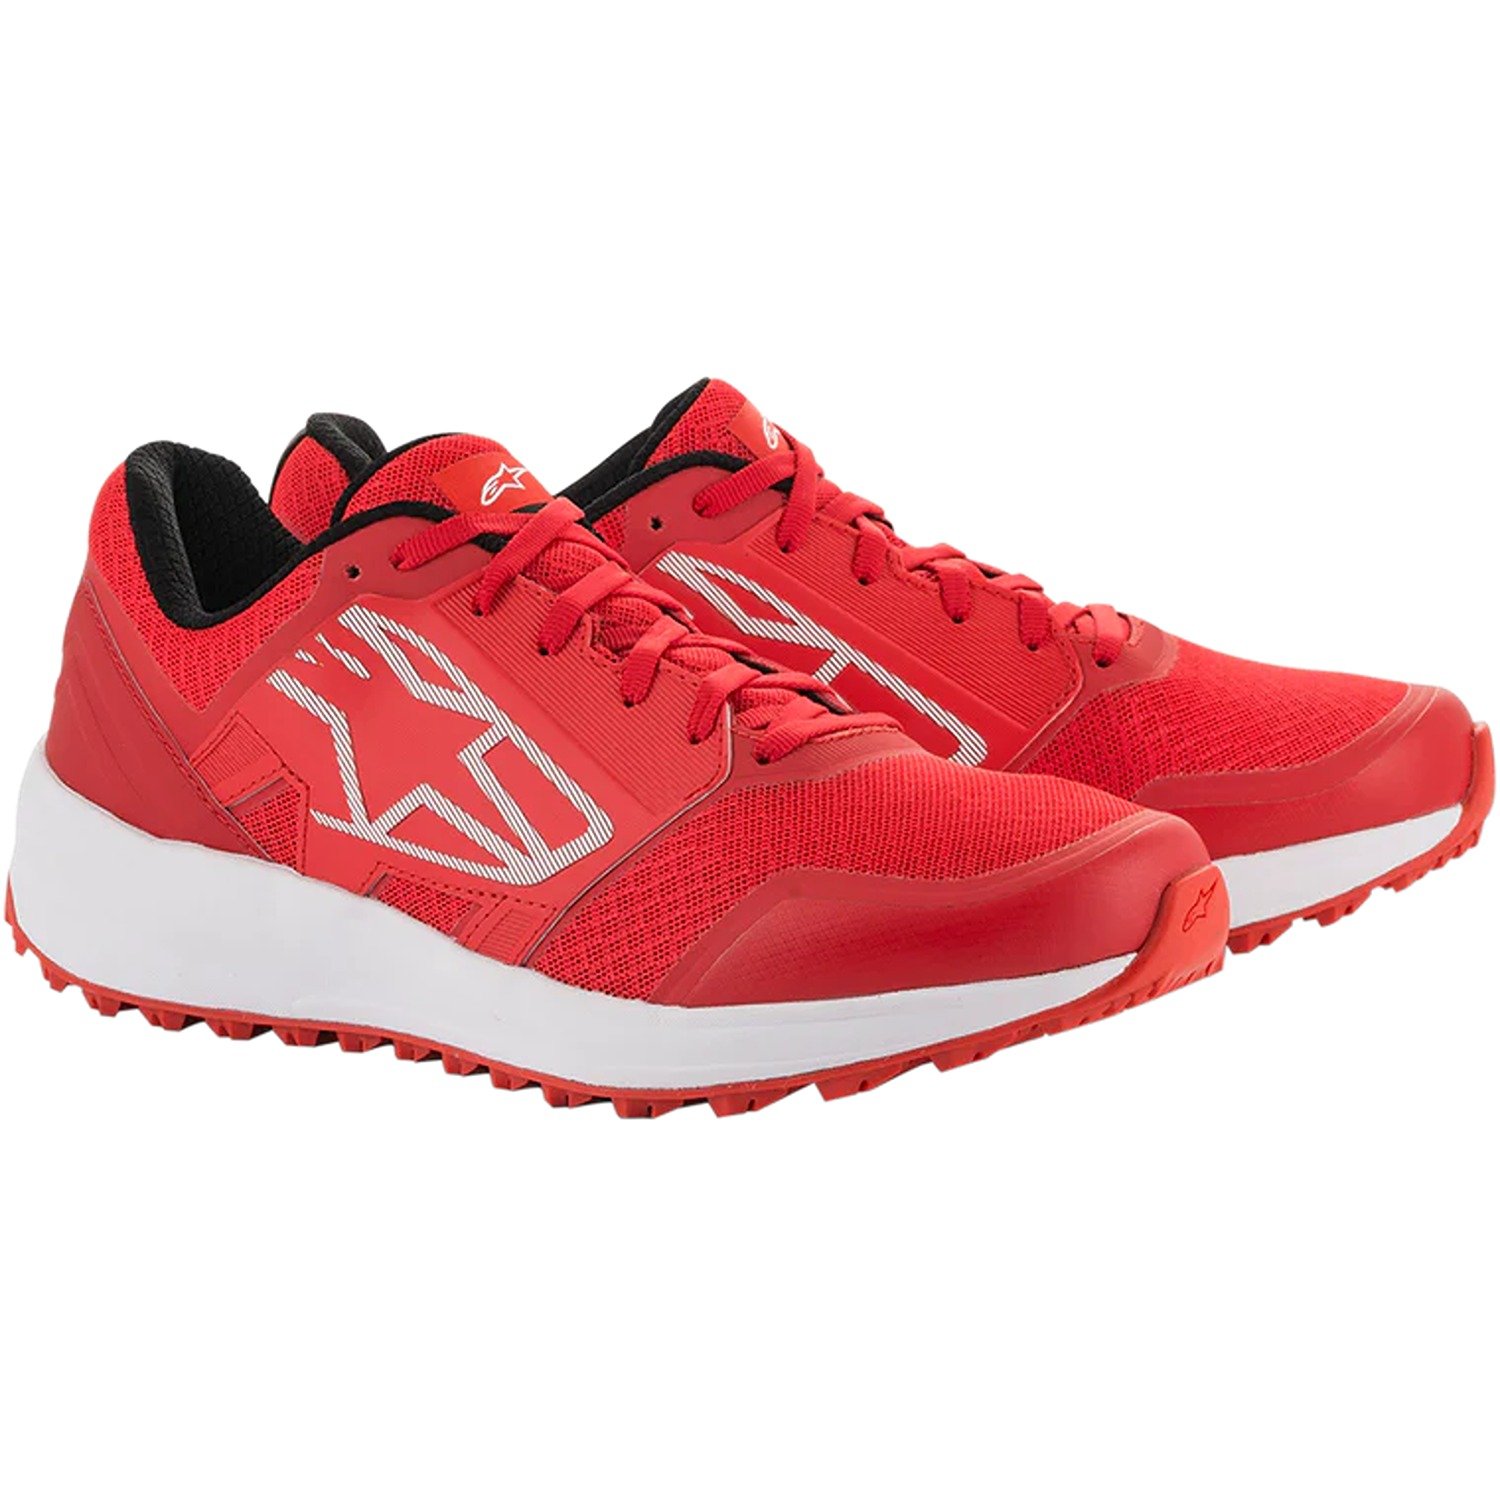 Image of EU Alpinestars Meta Trail Shoes Red White Taille US 11